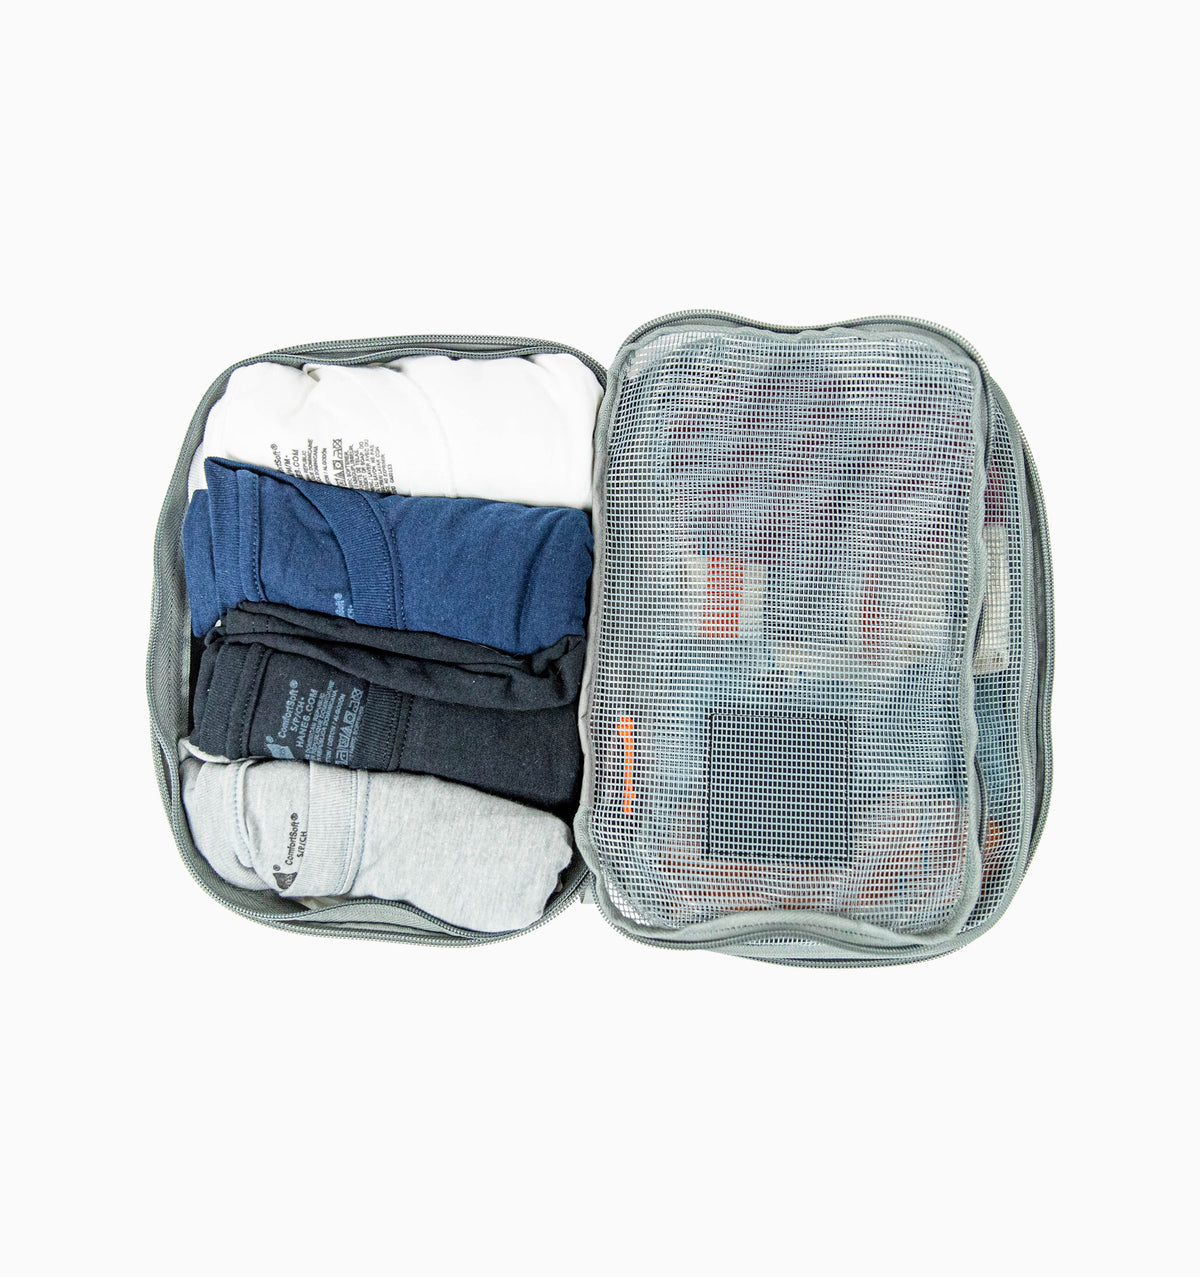 Evergoods Transit Packing Cube 8L - Grey